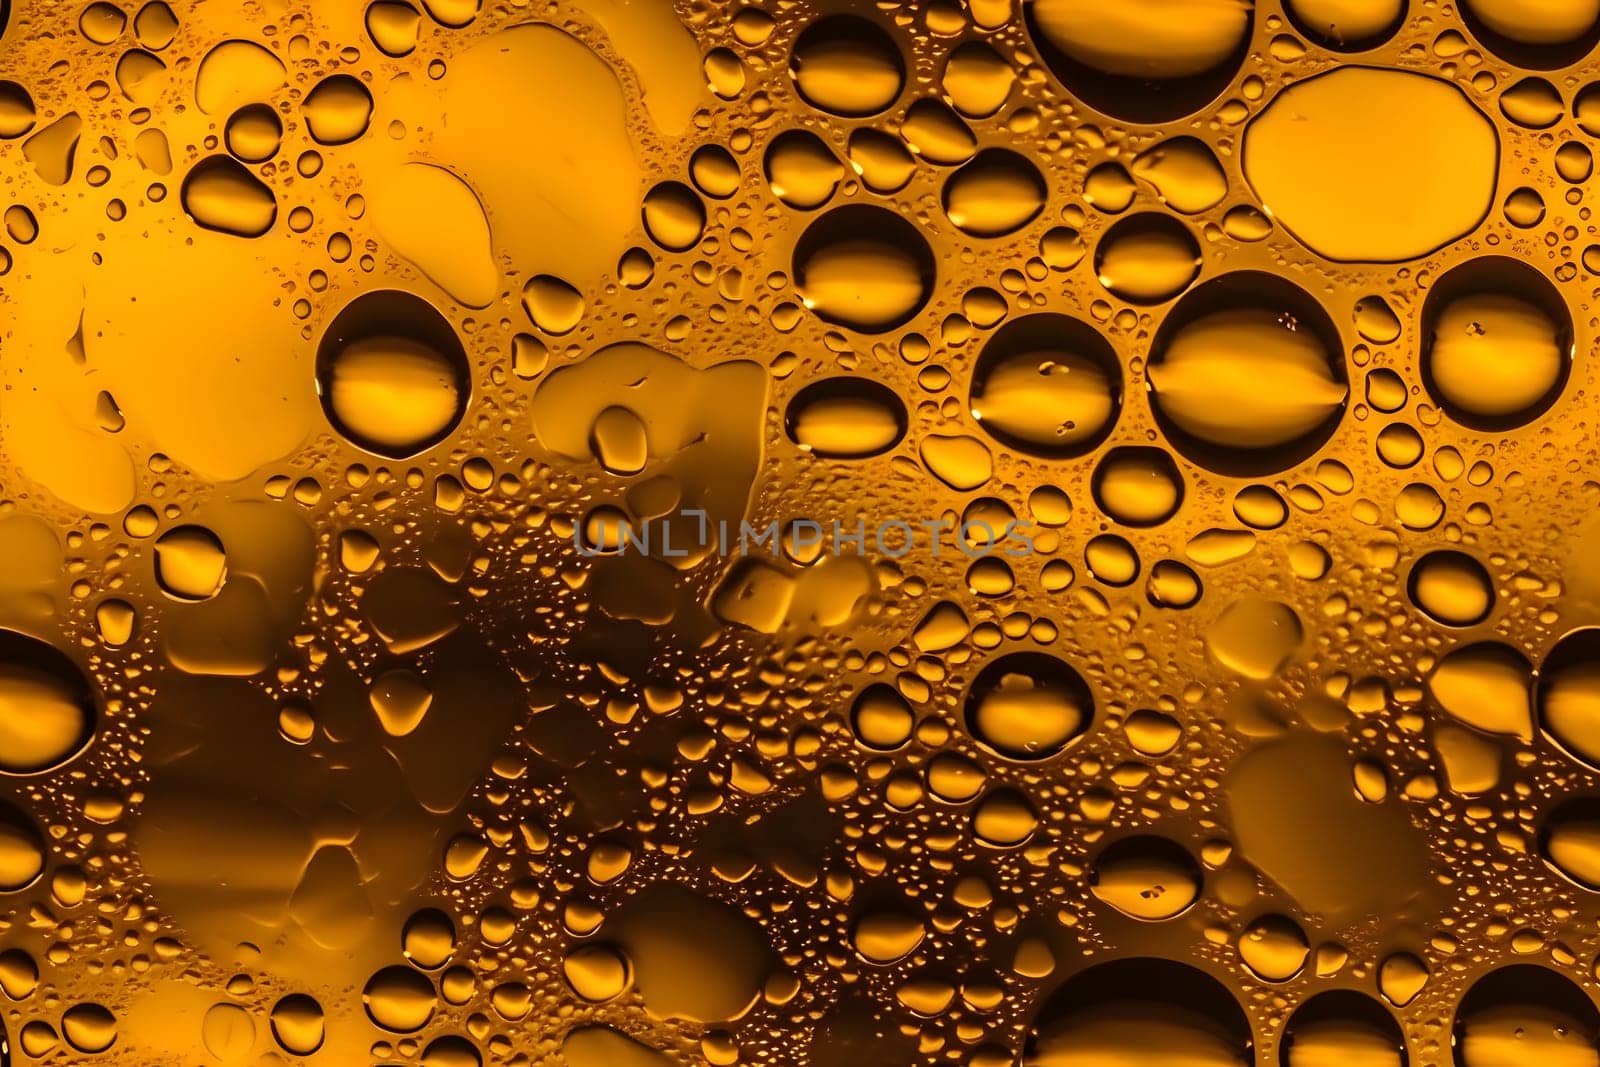 seamless yellow texture and full-frame background of water with oil or air bubbles, neural network generated art by z1b